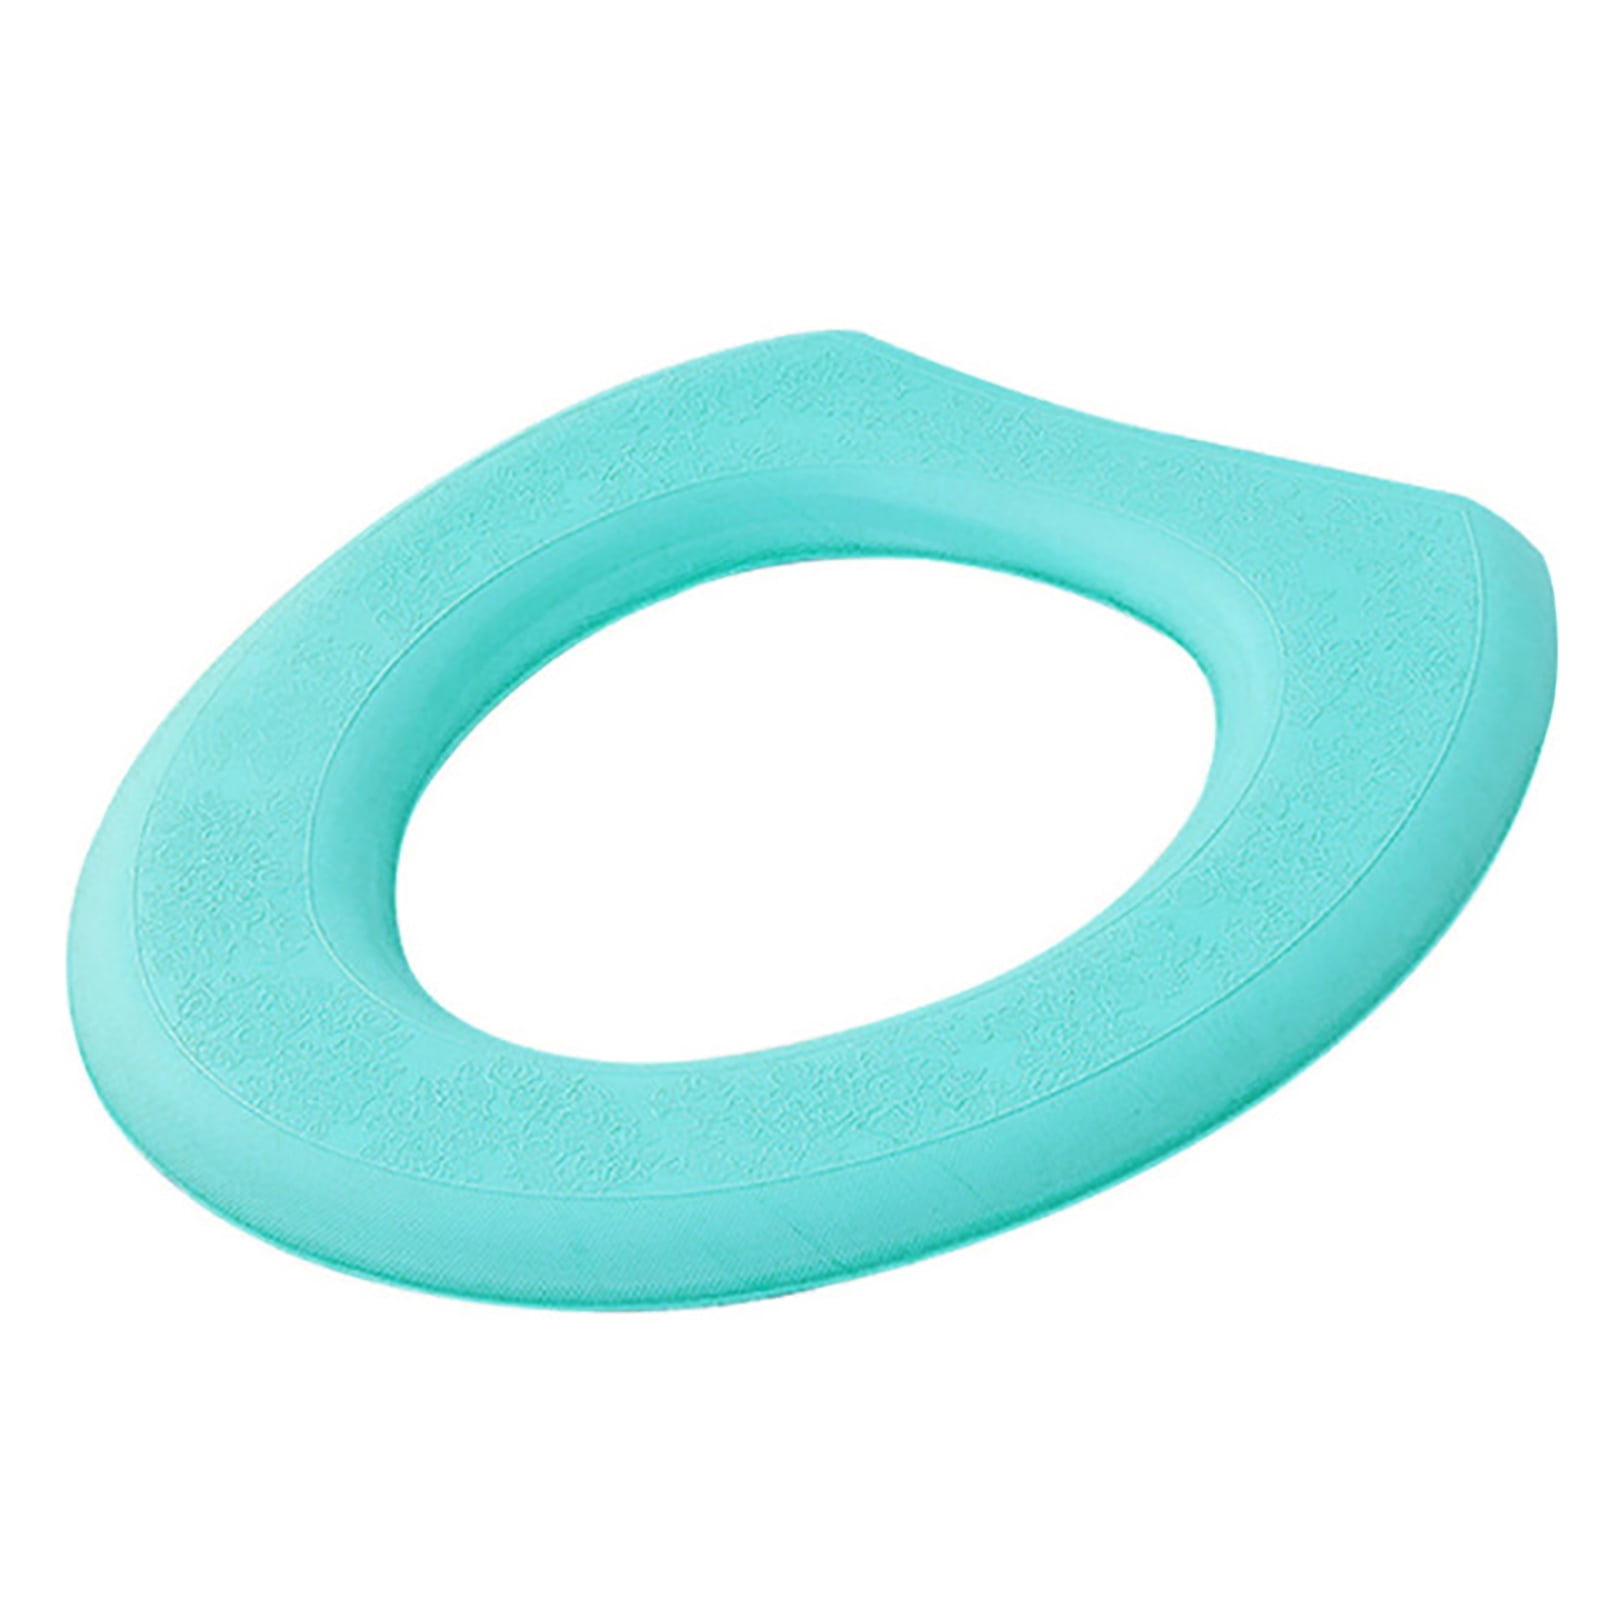 Winter Home Waterproof Soft Thickened Warm O Shape Toilet Seat Cover Cushion 